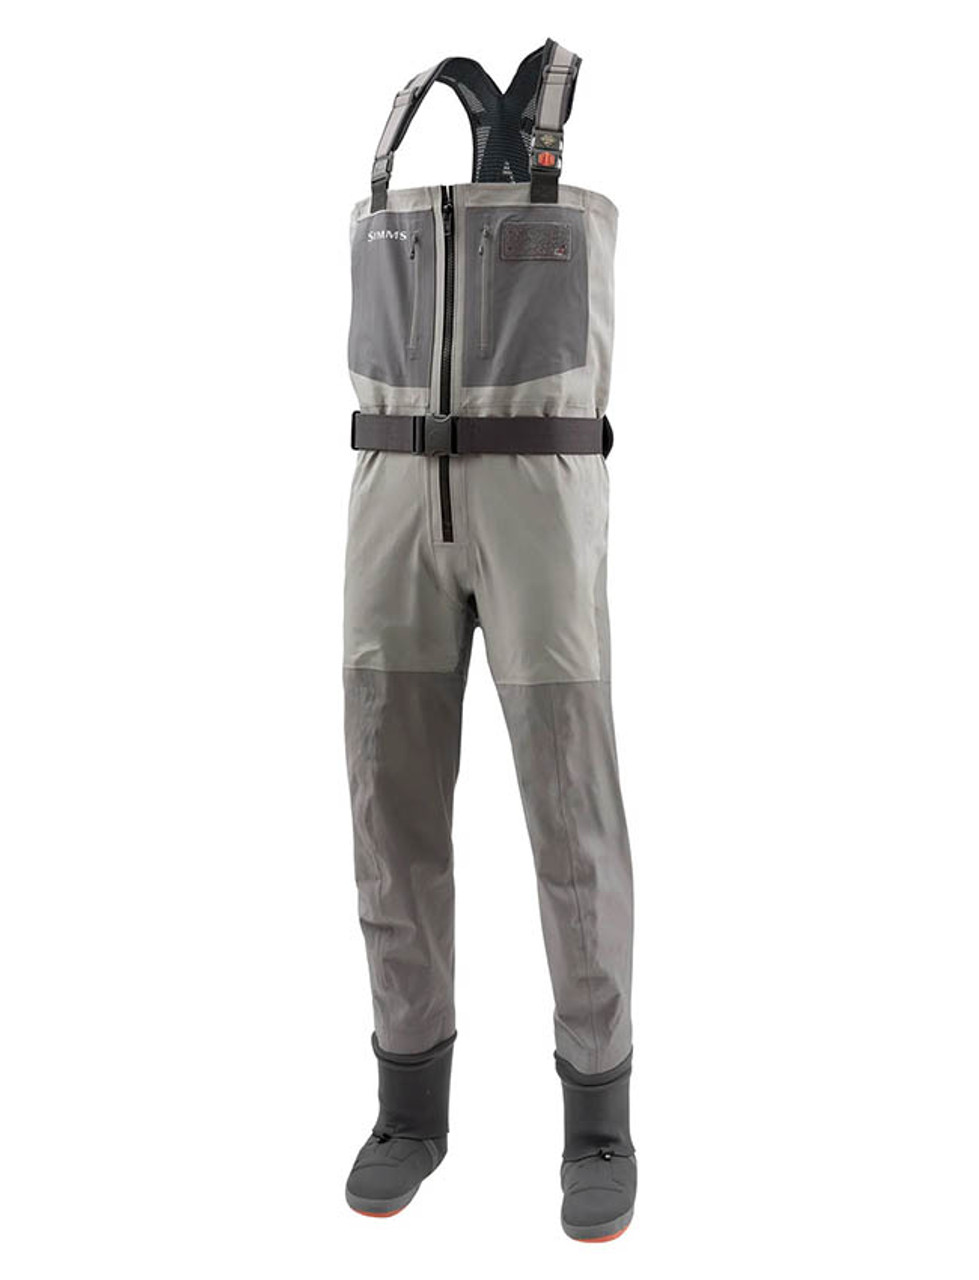 Simms G4Z Waders - Stockingfoot - Slate (12573) - Sizes MK (9-11) to 2XL  (12-13)